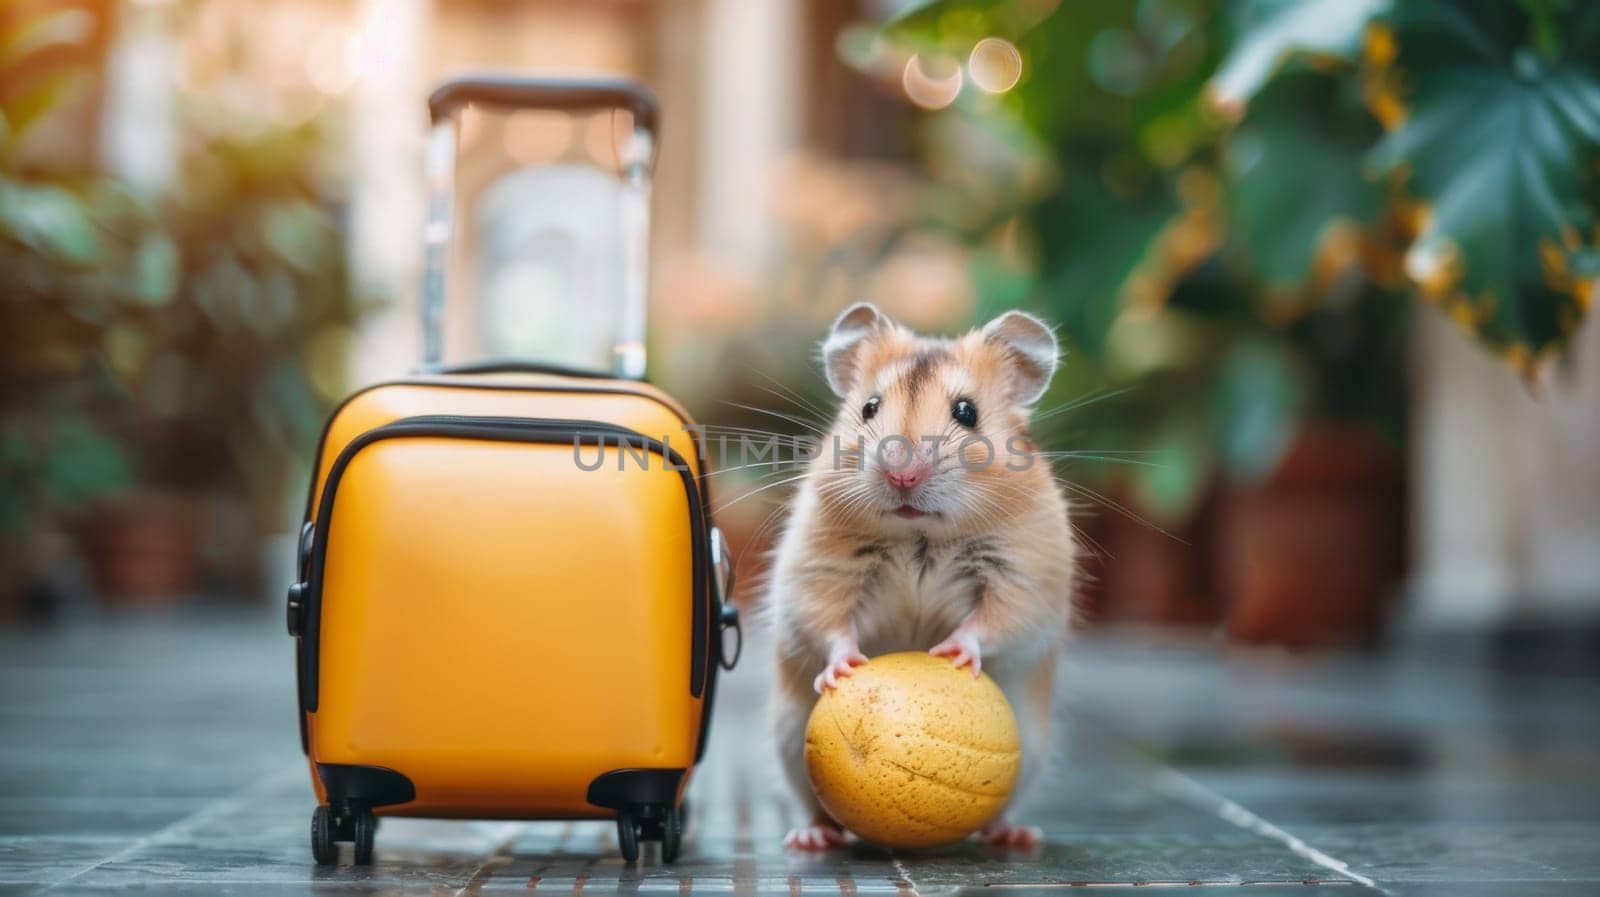 A hamster with yellow ball next to a suitcase on tile, AI by starush